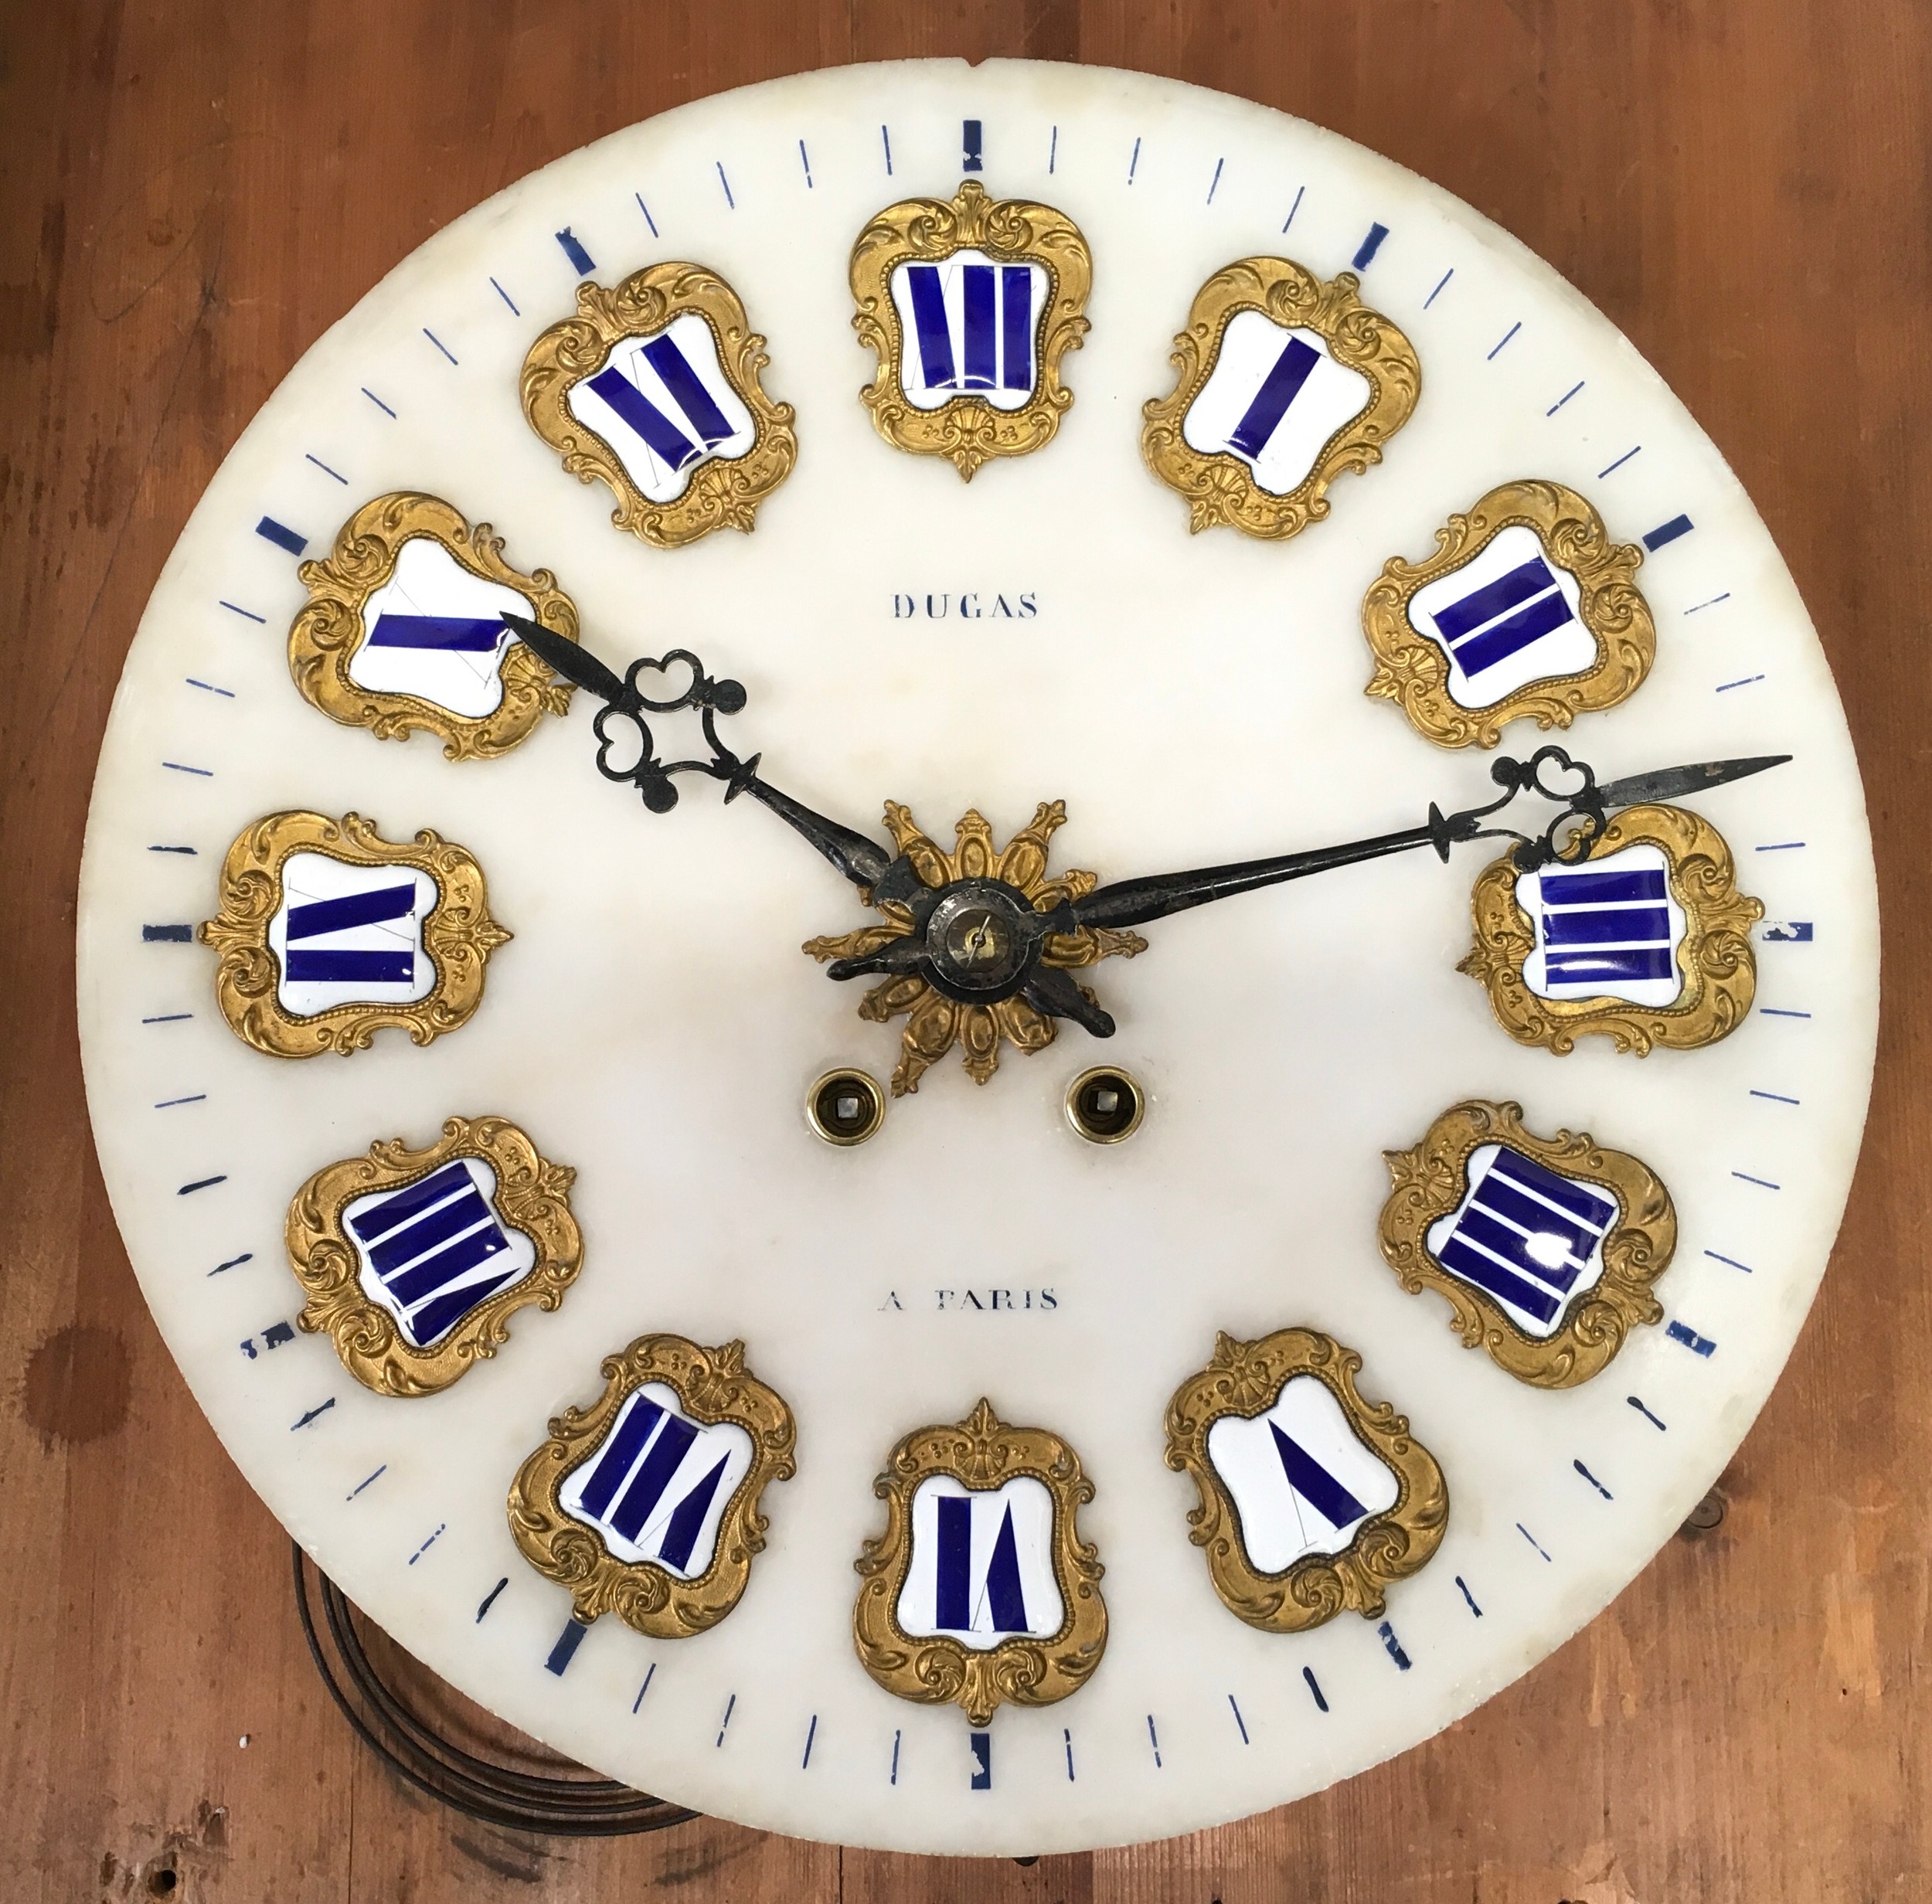 Quality wall clock with gilded enamel hour markers, signed Dugas a Paris to dial. Housed in a glazed - Image 2 of 9